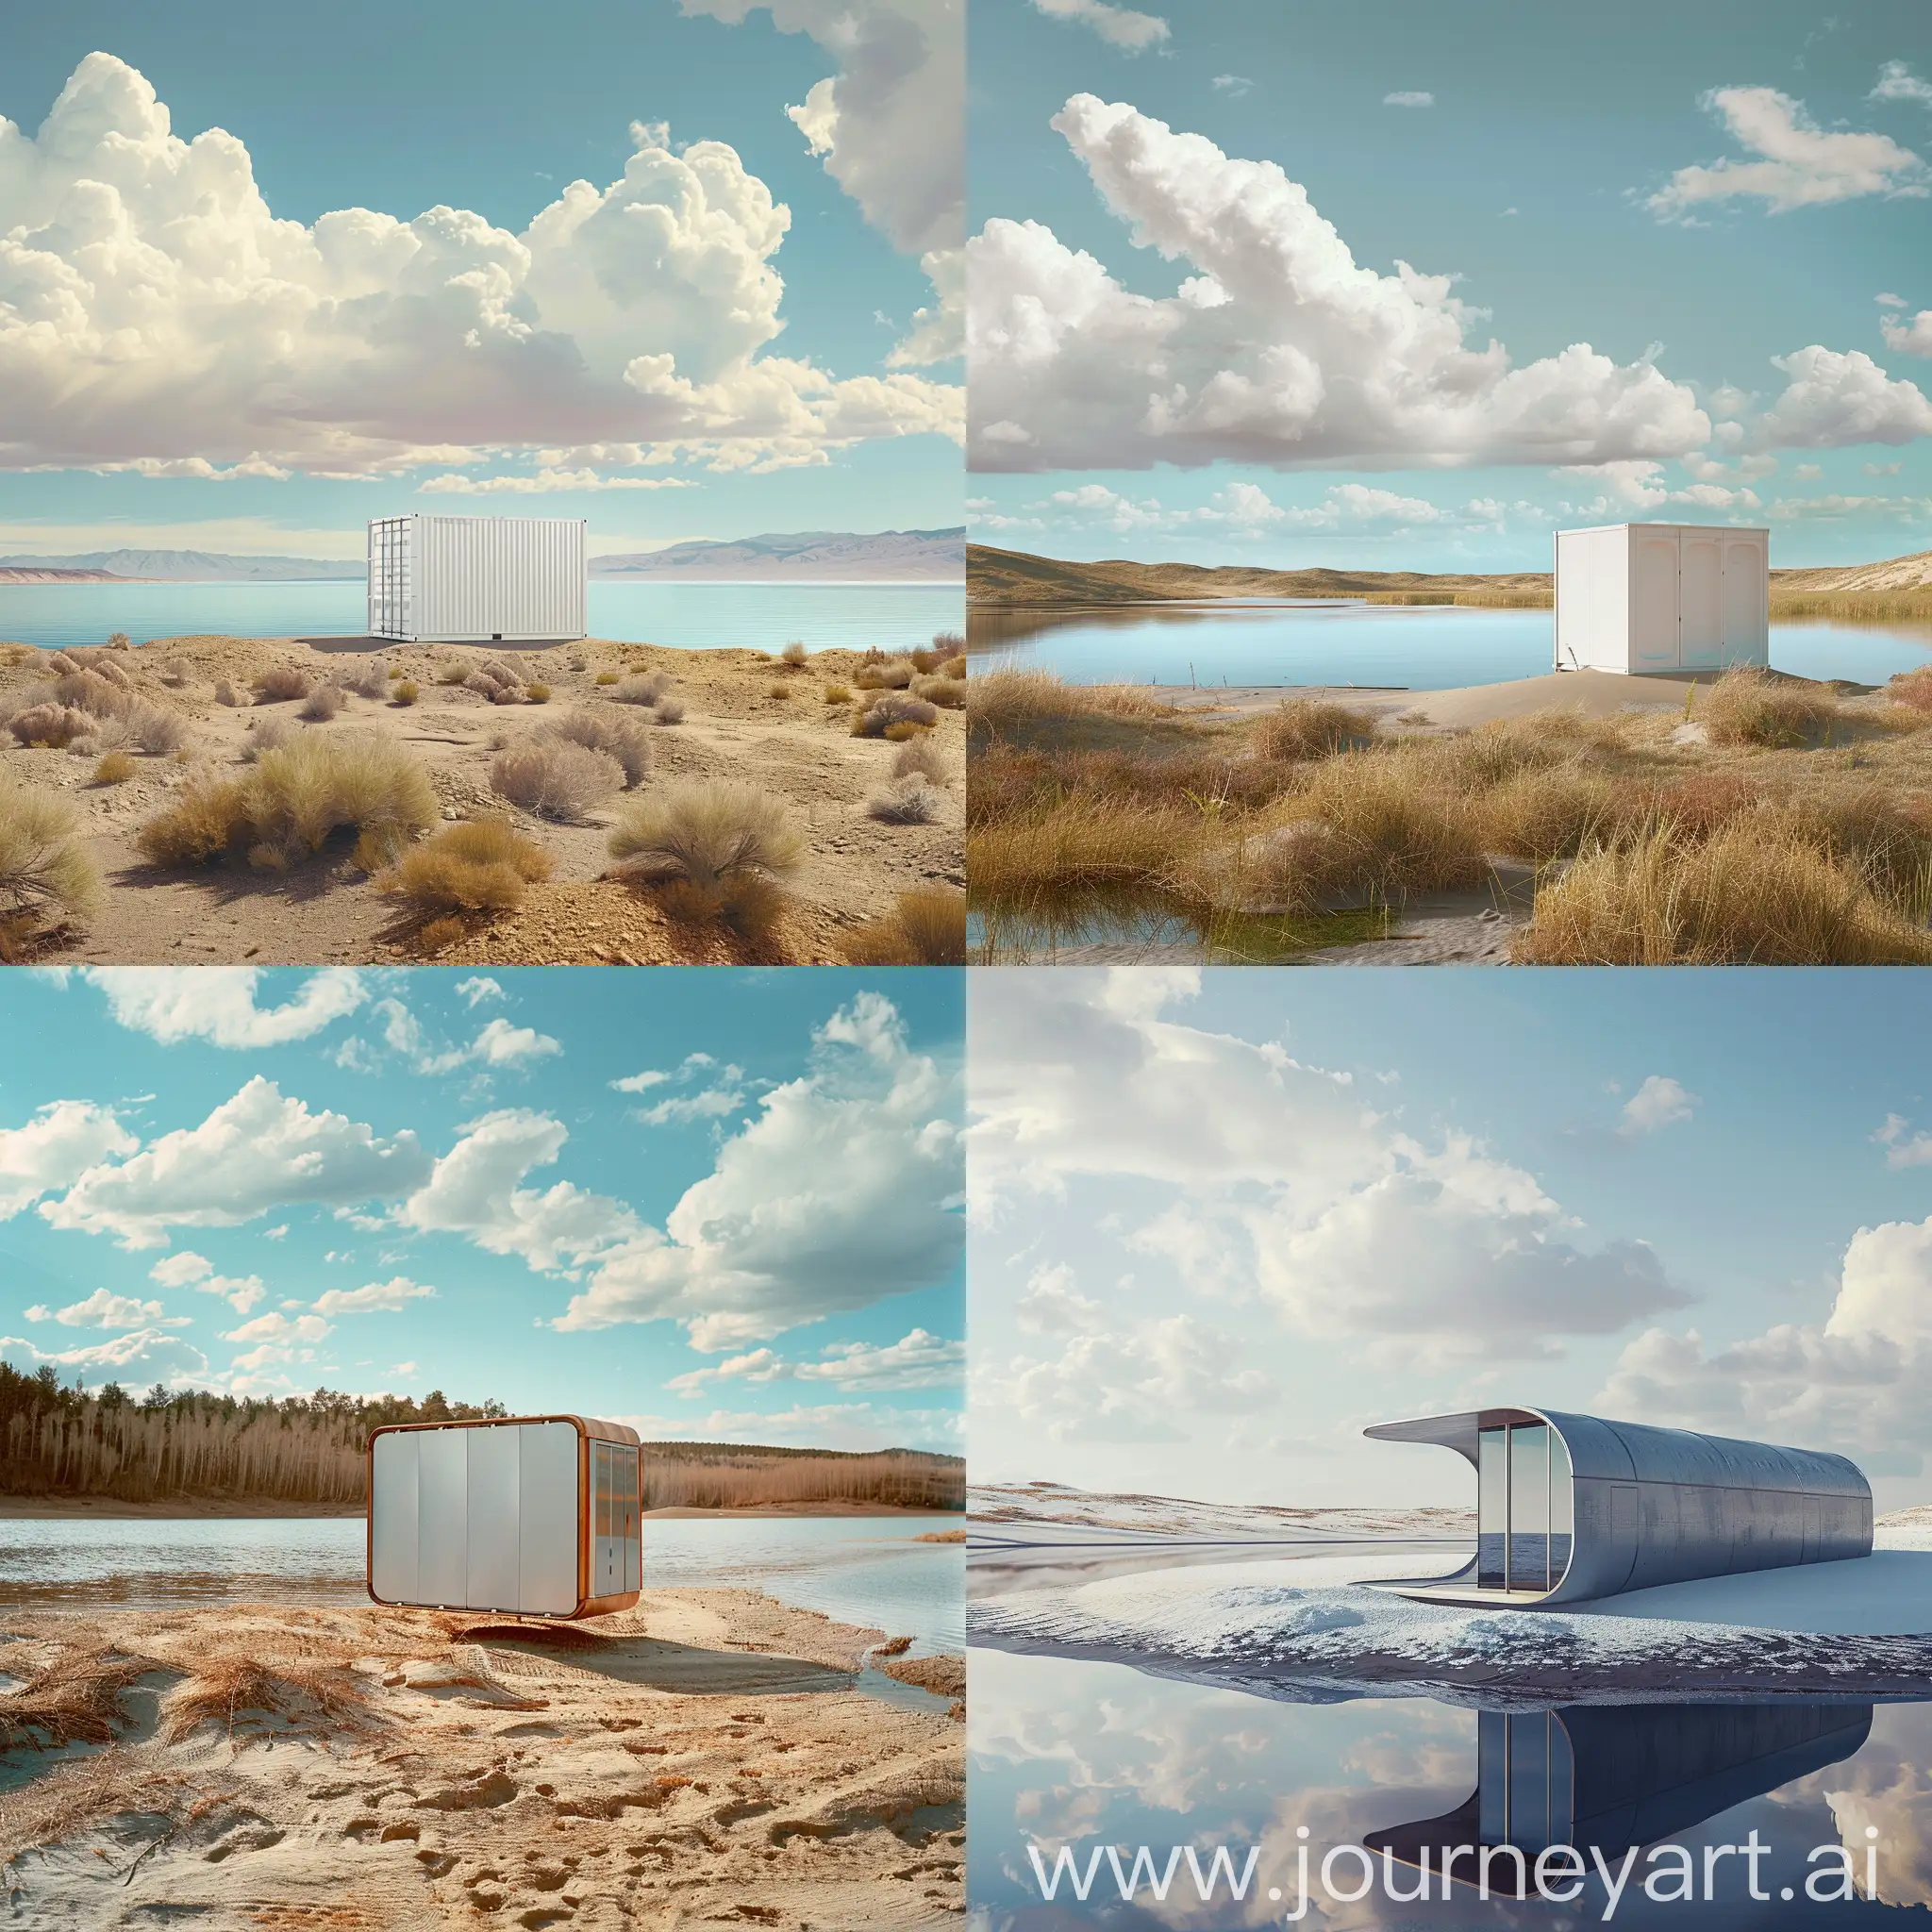 energy storage container, sands, sky, lake